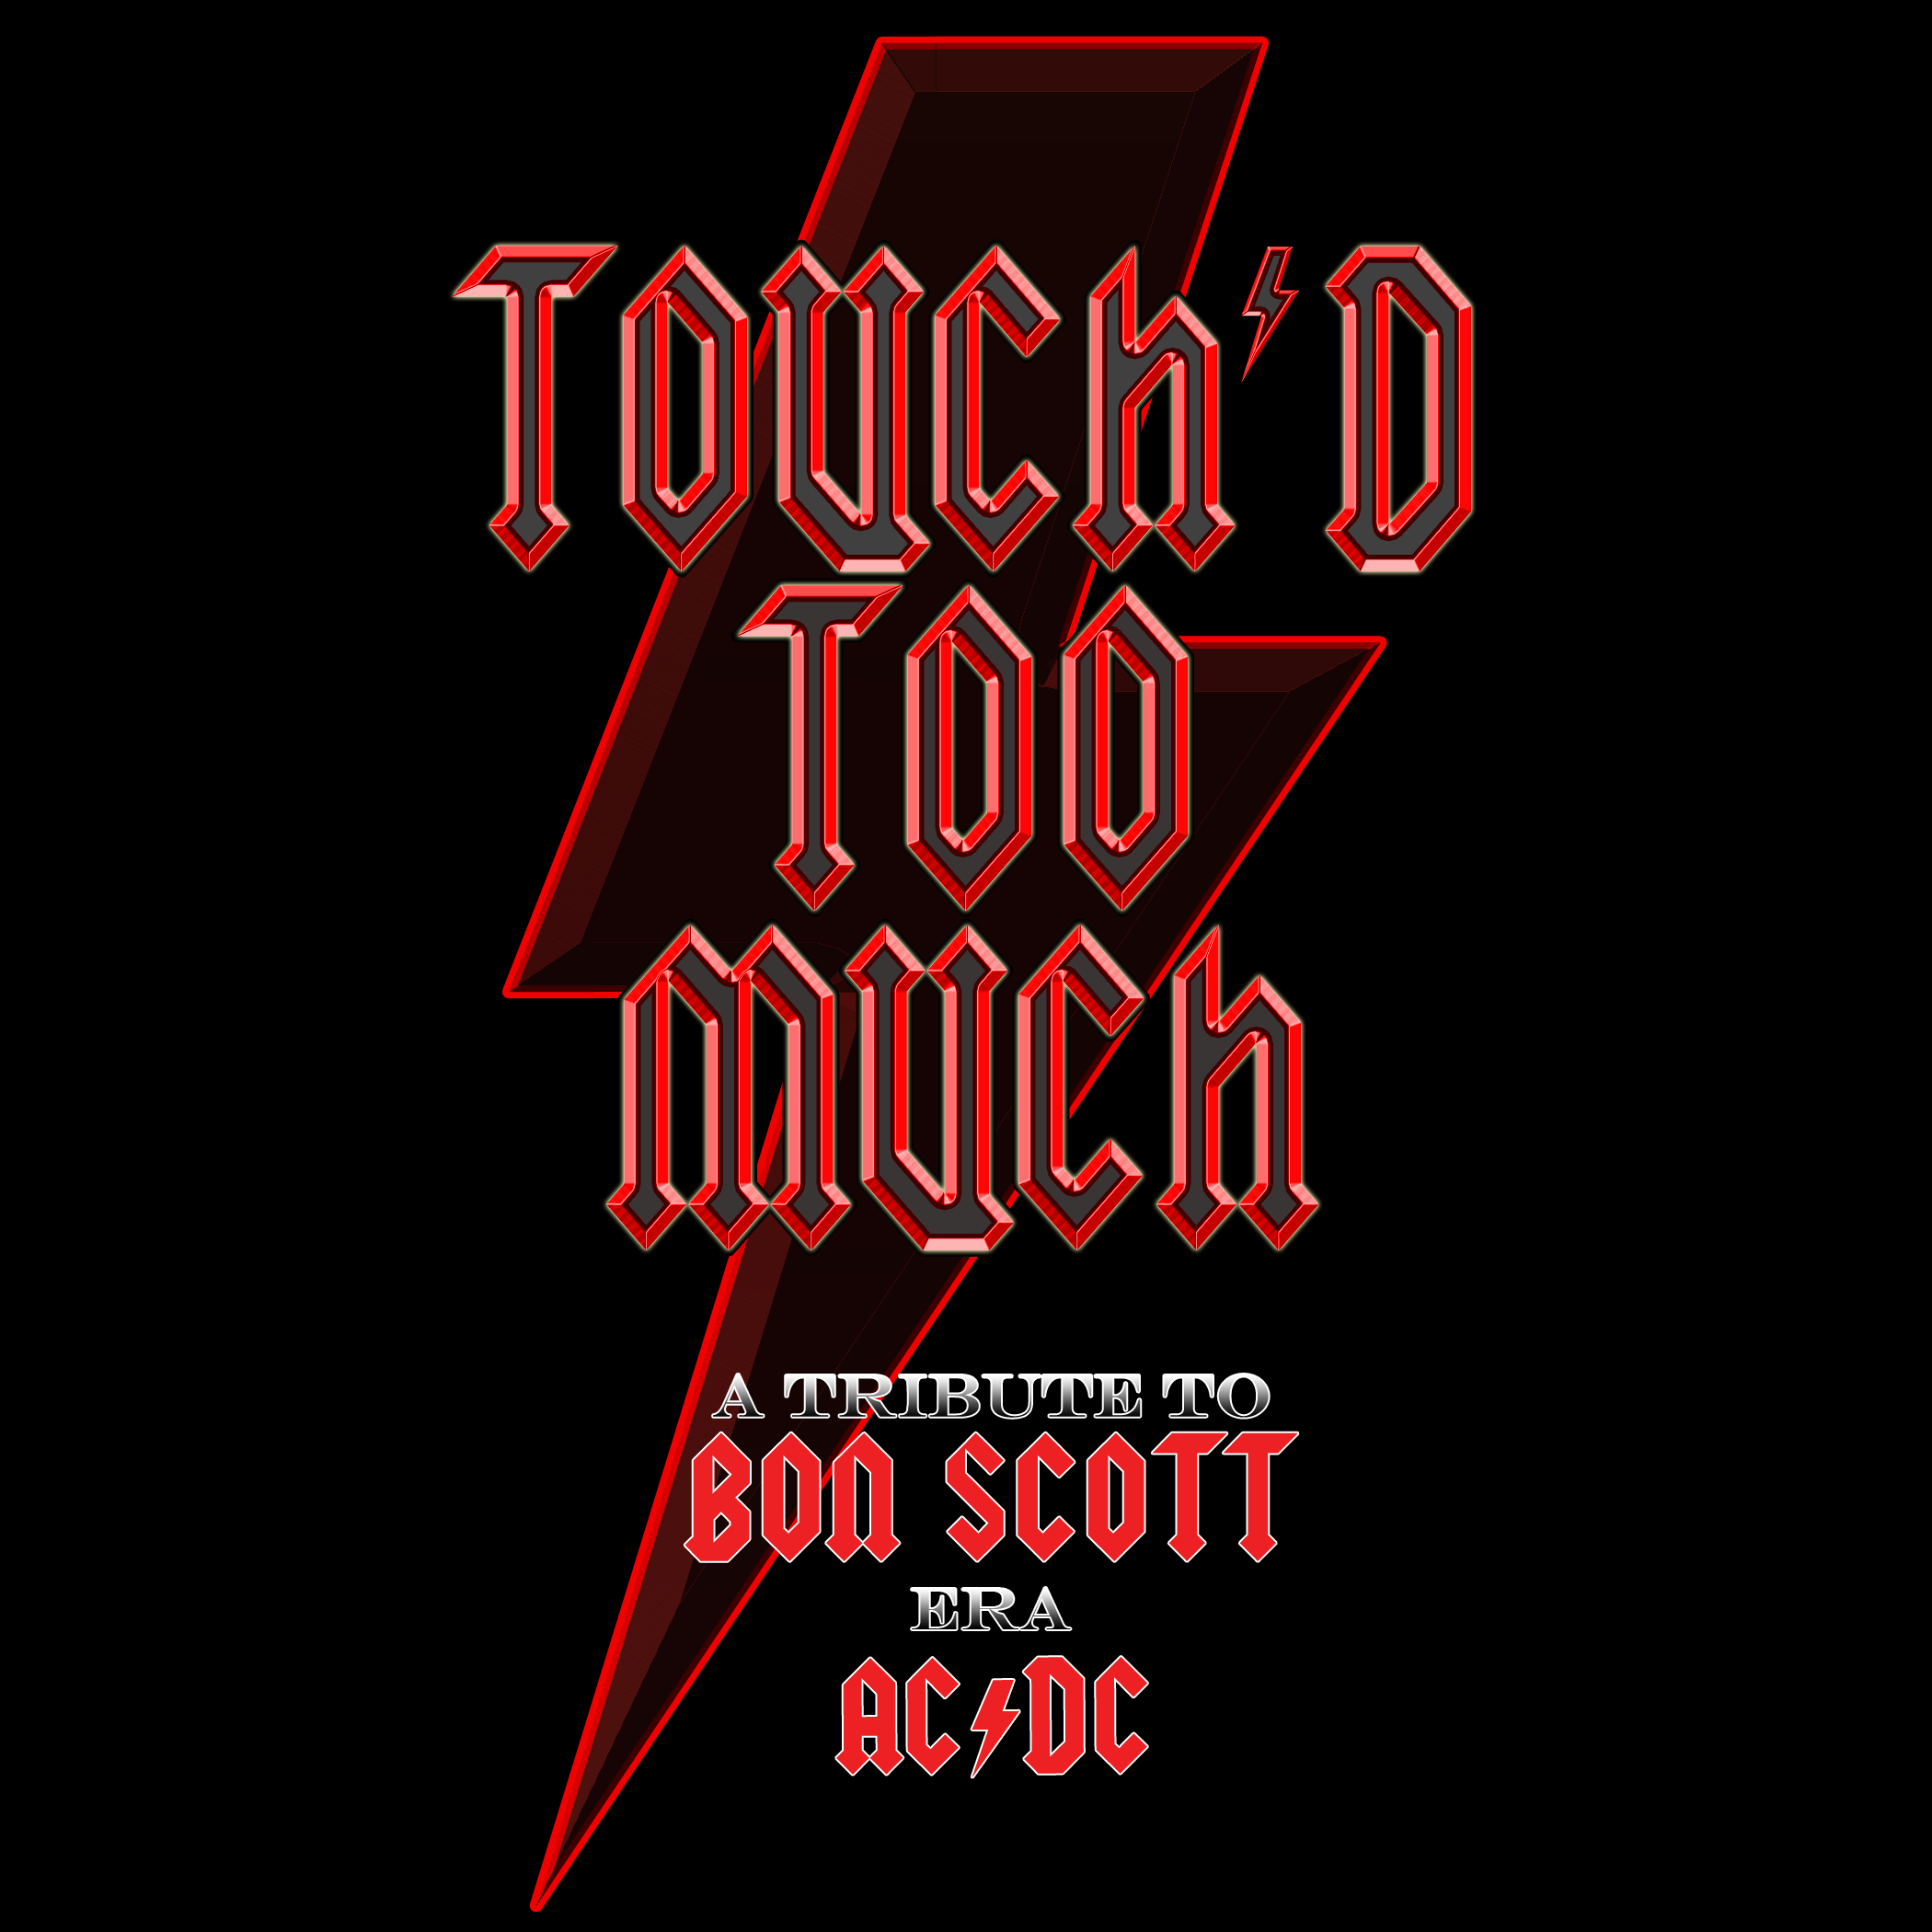 Touch too much ,live wire , shot down in flames by Ac/Dc, SP with didierf -  Ref:118743384